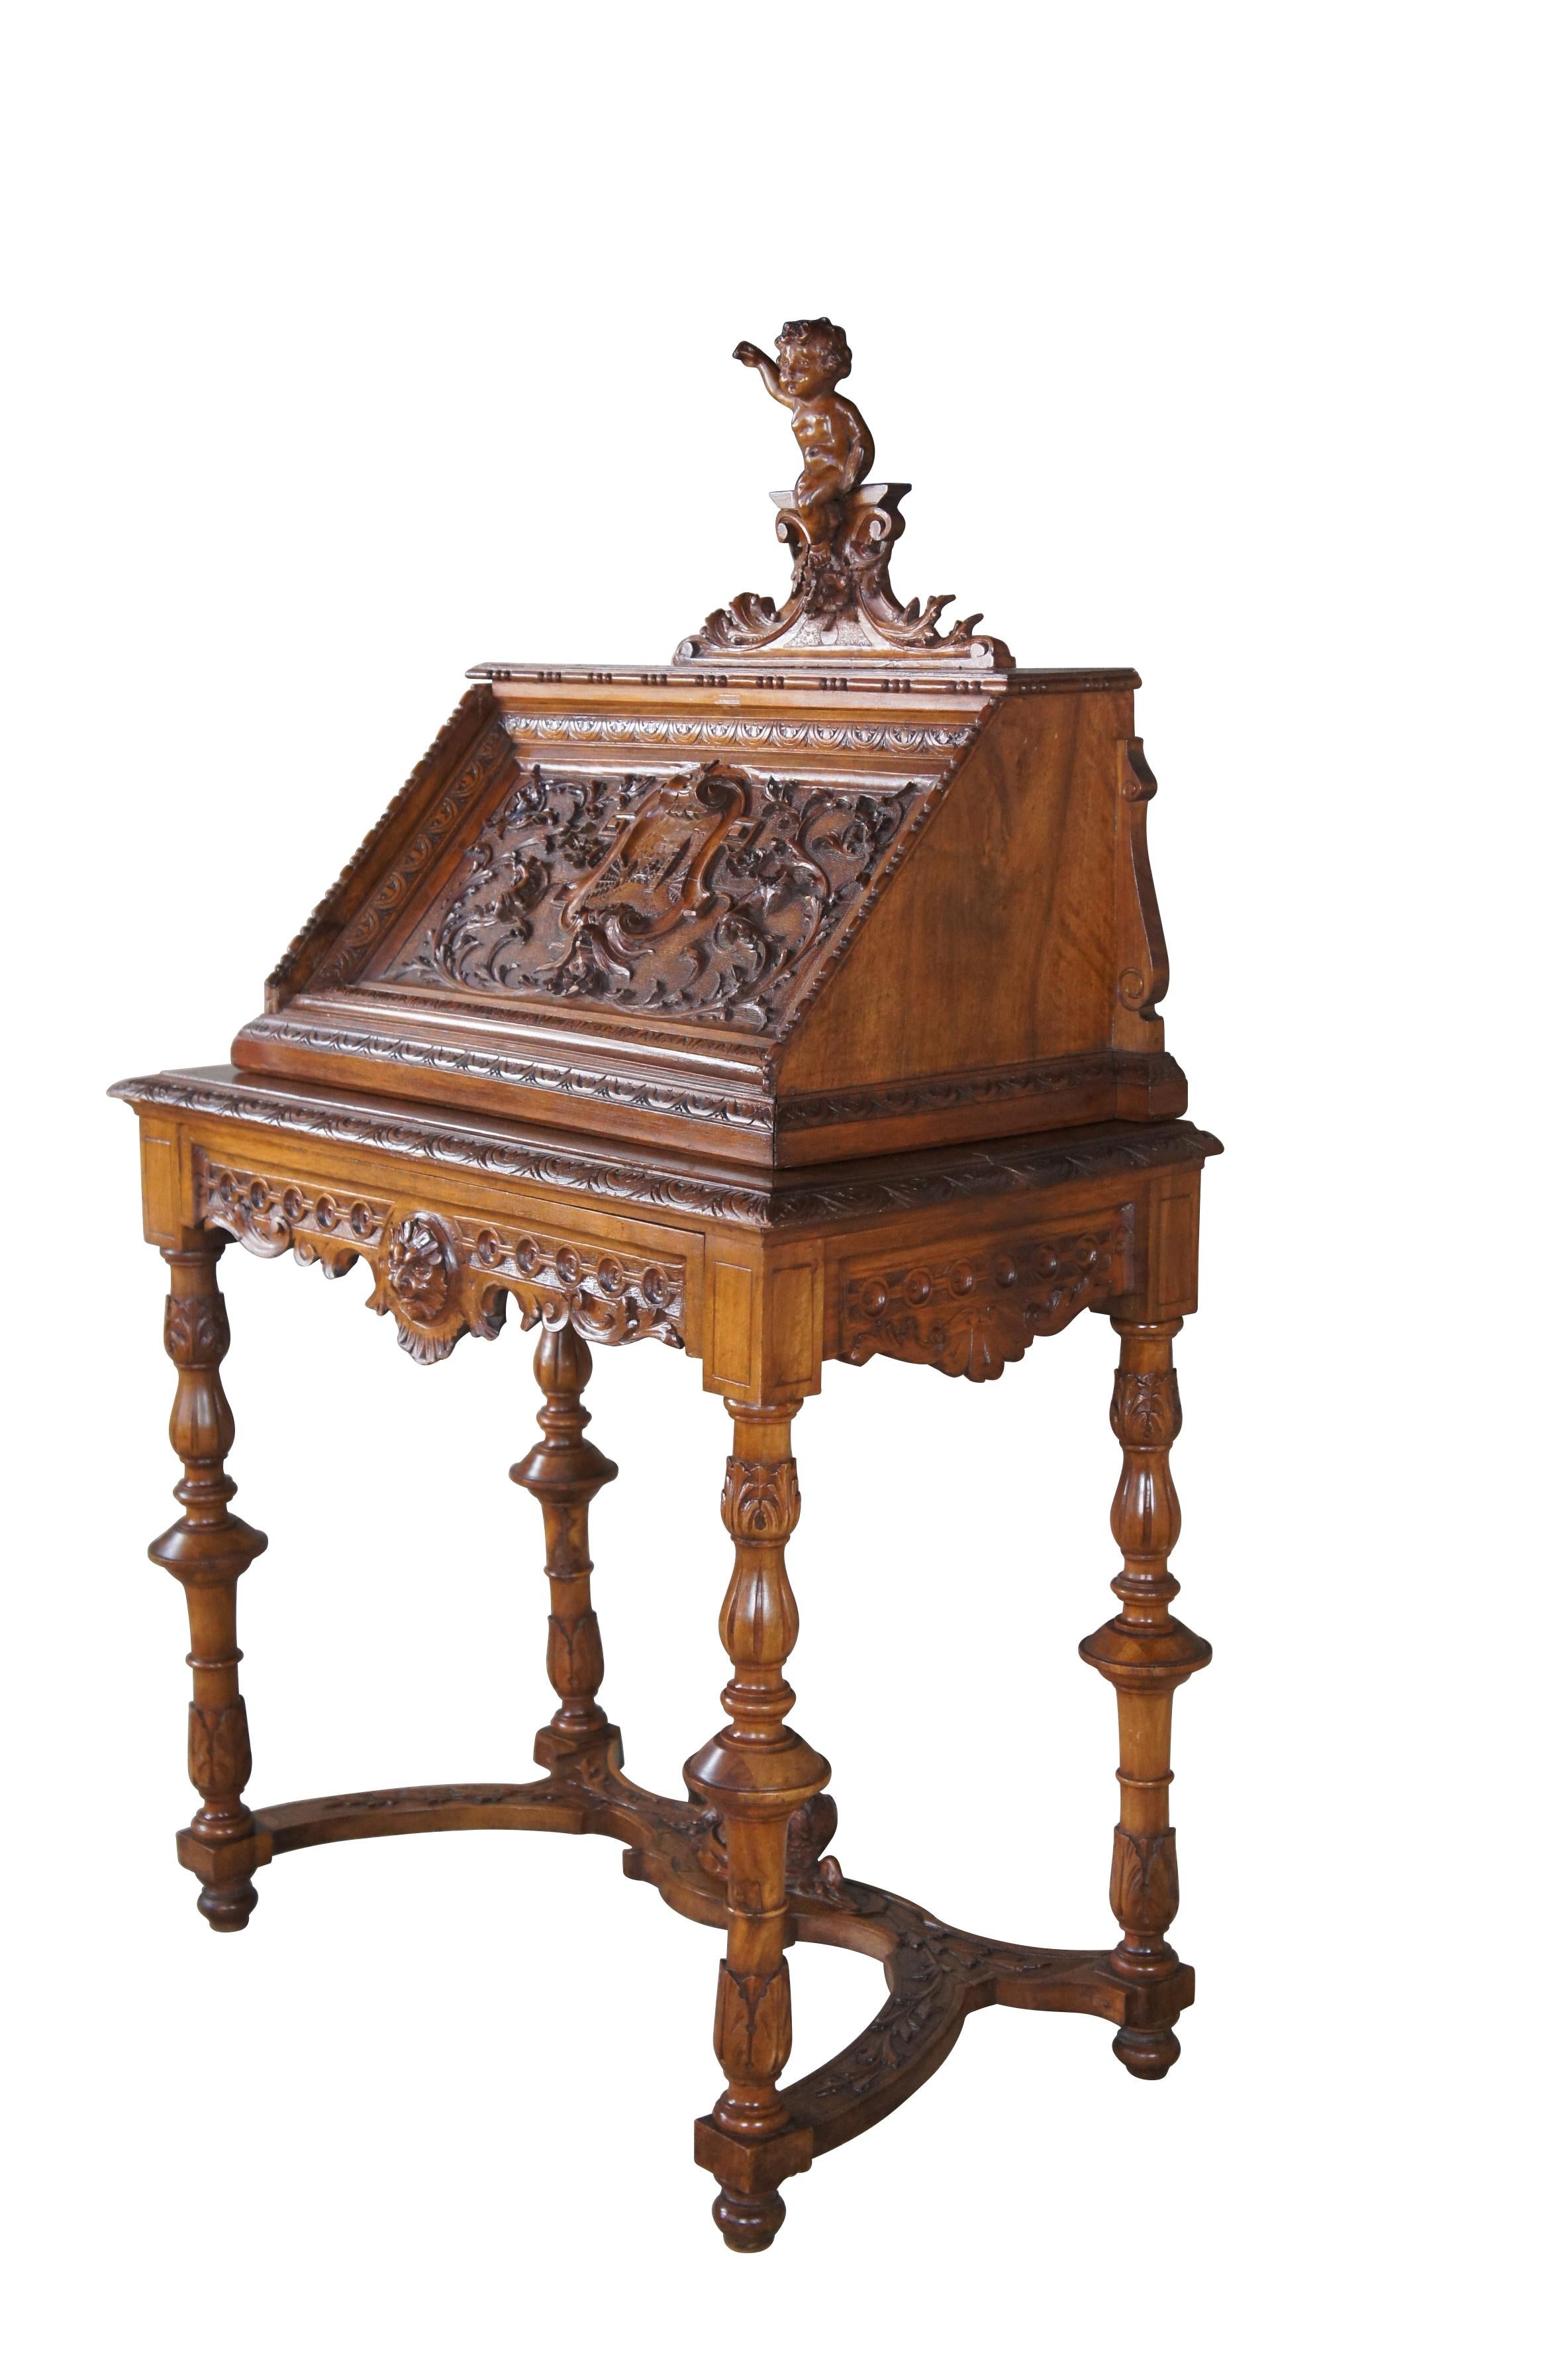 Antique Neo-Renaissance Revival writing desk.  Made of walnut featuring Neoclassical styling with high relief figural carvings of cherubs / puttis, Northwind faces, and acanthus / floral designs.  The desk features a drop front door with griffons